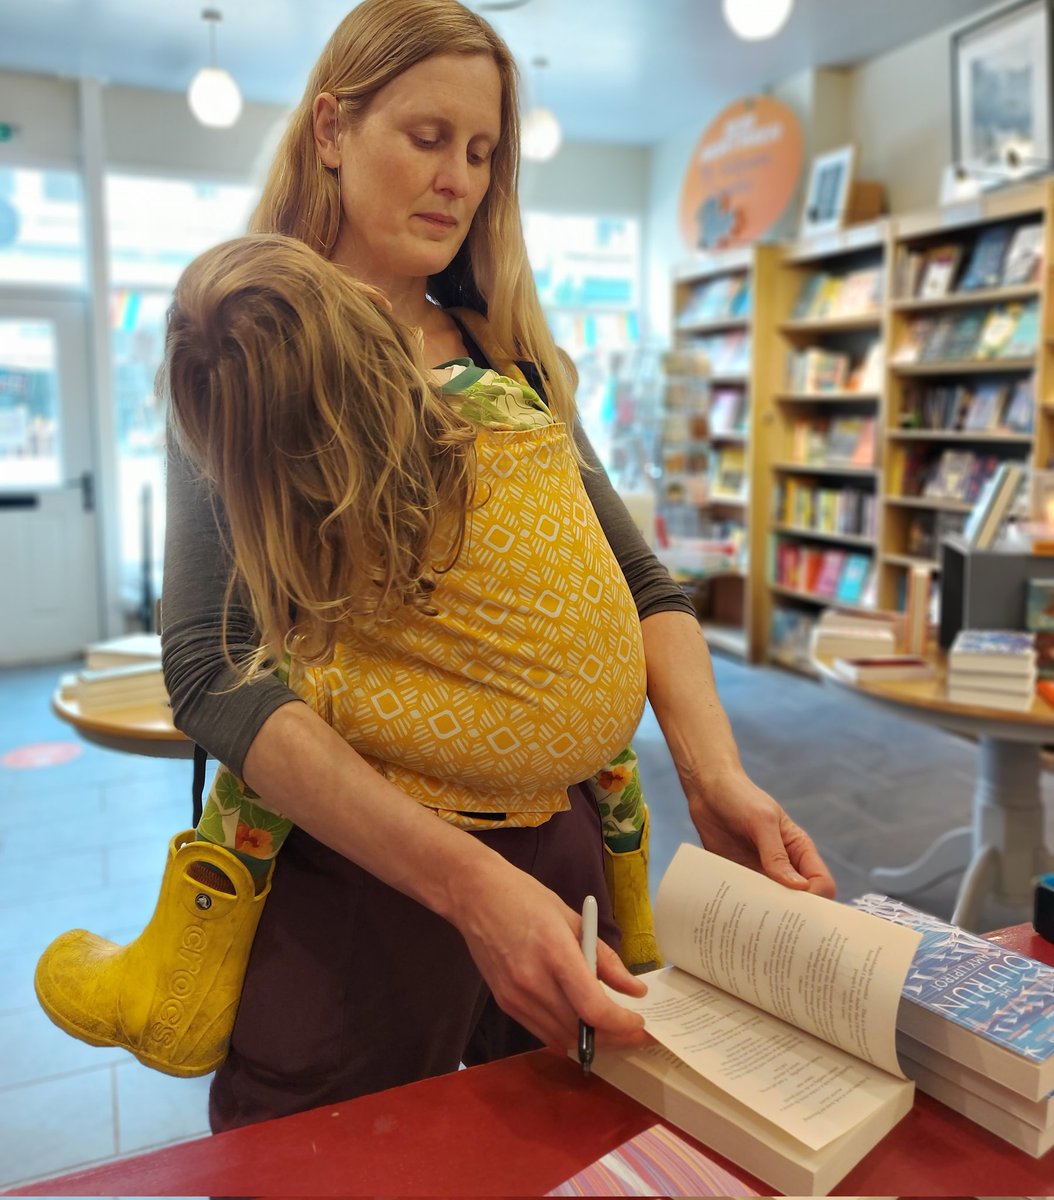 Multi-tasking! Ilove this photo 📸 Thankyou @amymayyyy for taking a moment to sign a few books for us today #hebdenbridge #motherhood #womenwriters #naturewriter @_thebookseller